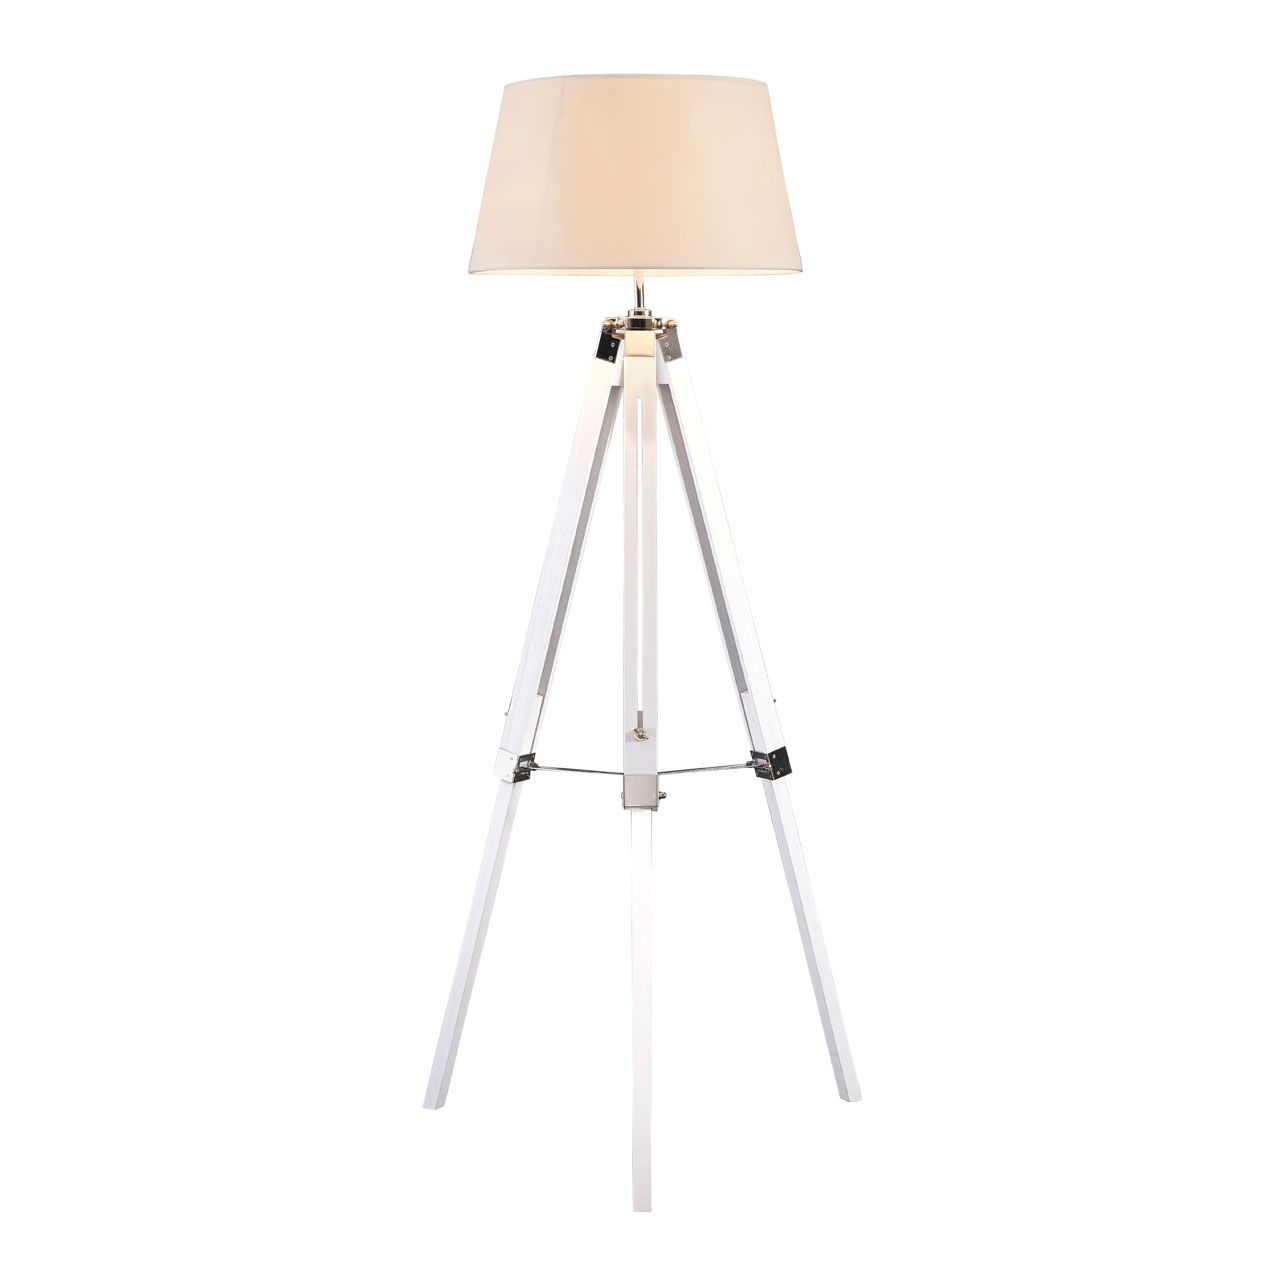 Bailey Cream Fabric Shade Floor Lamp With White Wooden Tripod Base